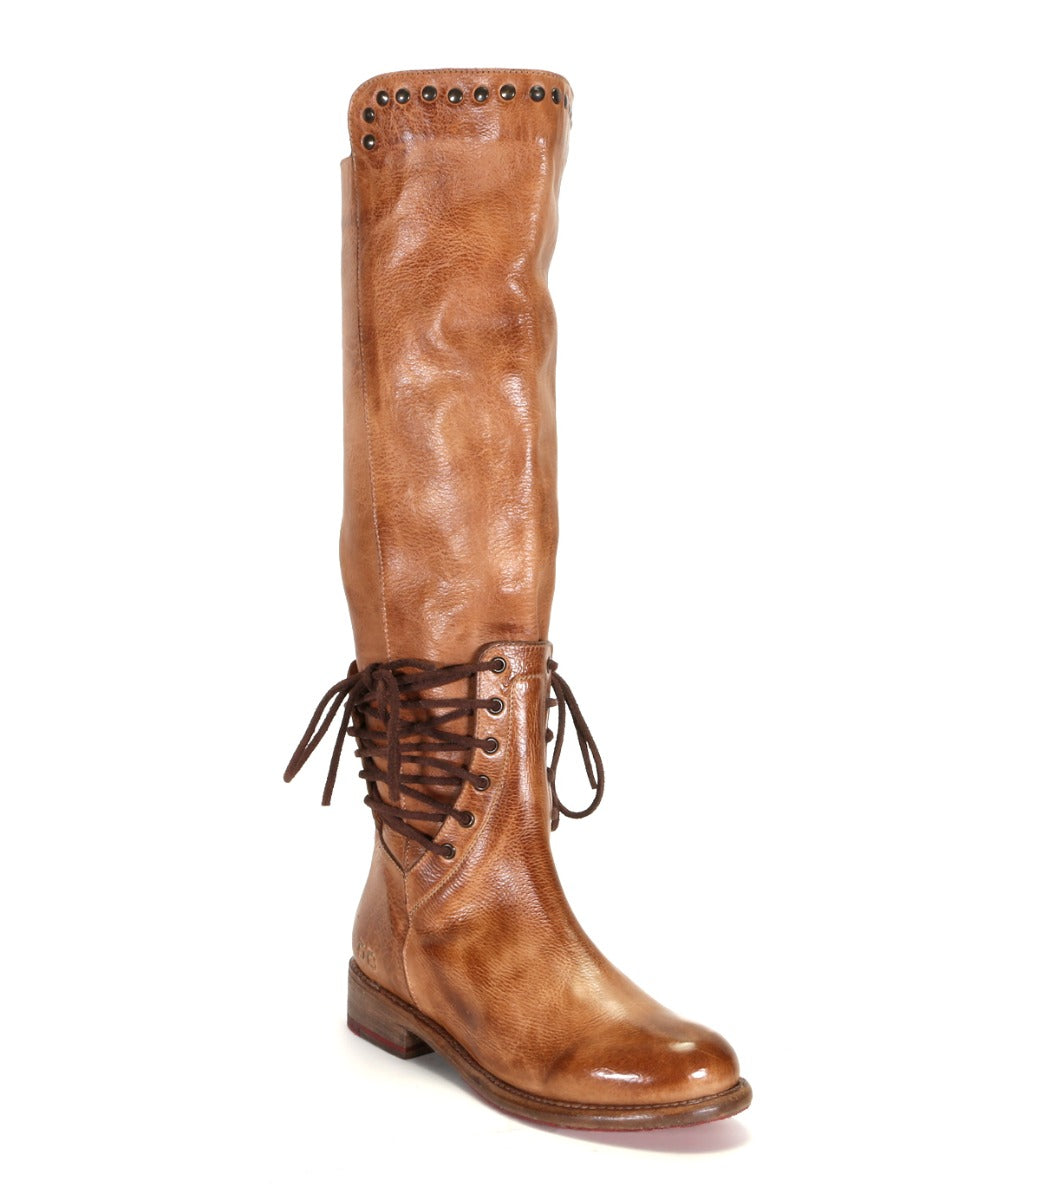 A women's Loxley boot with laces, made by Bed Stu.